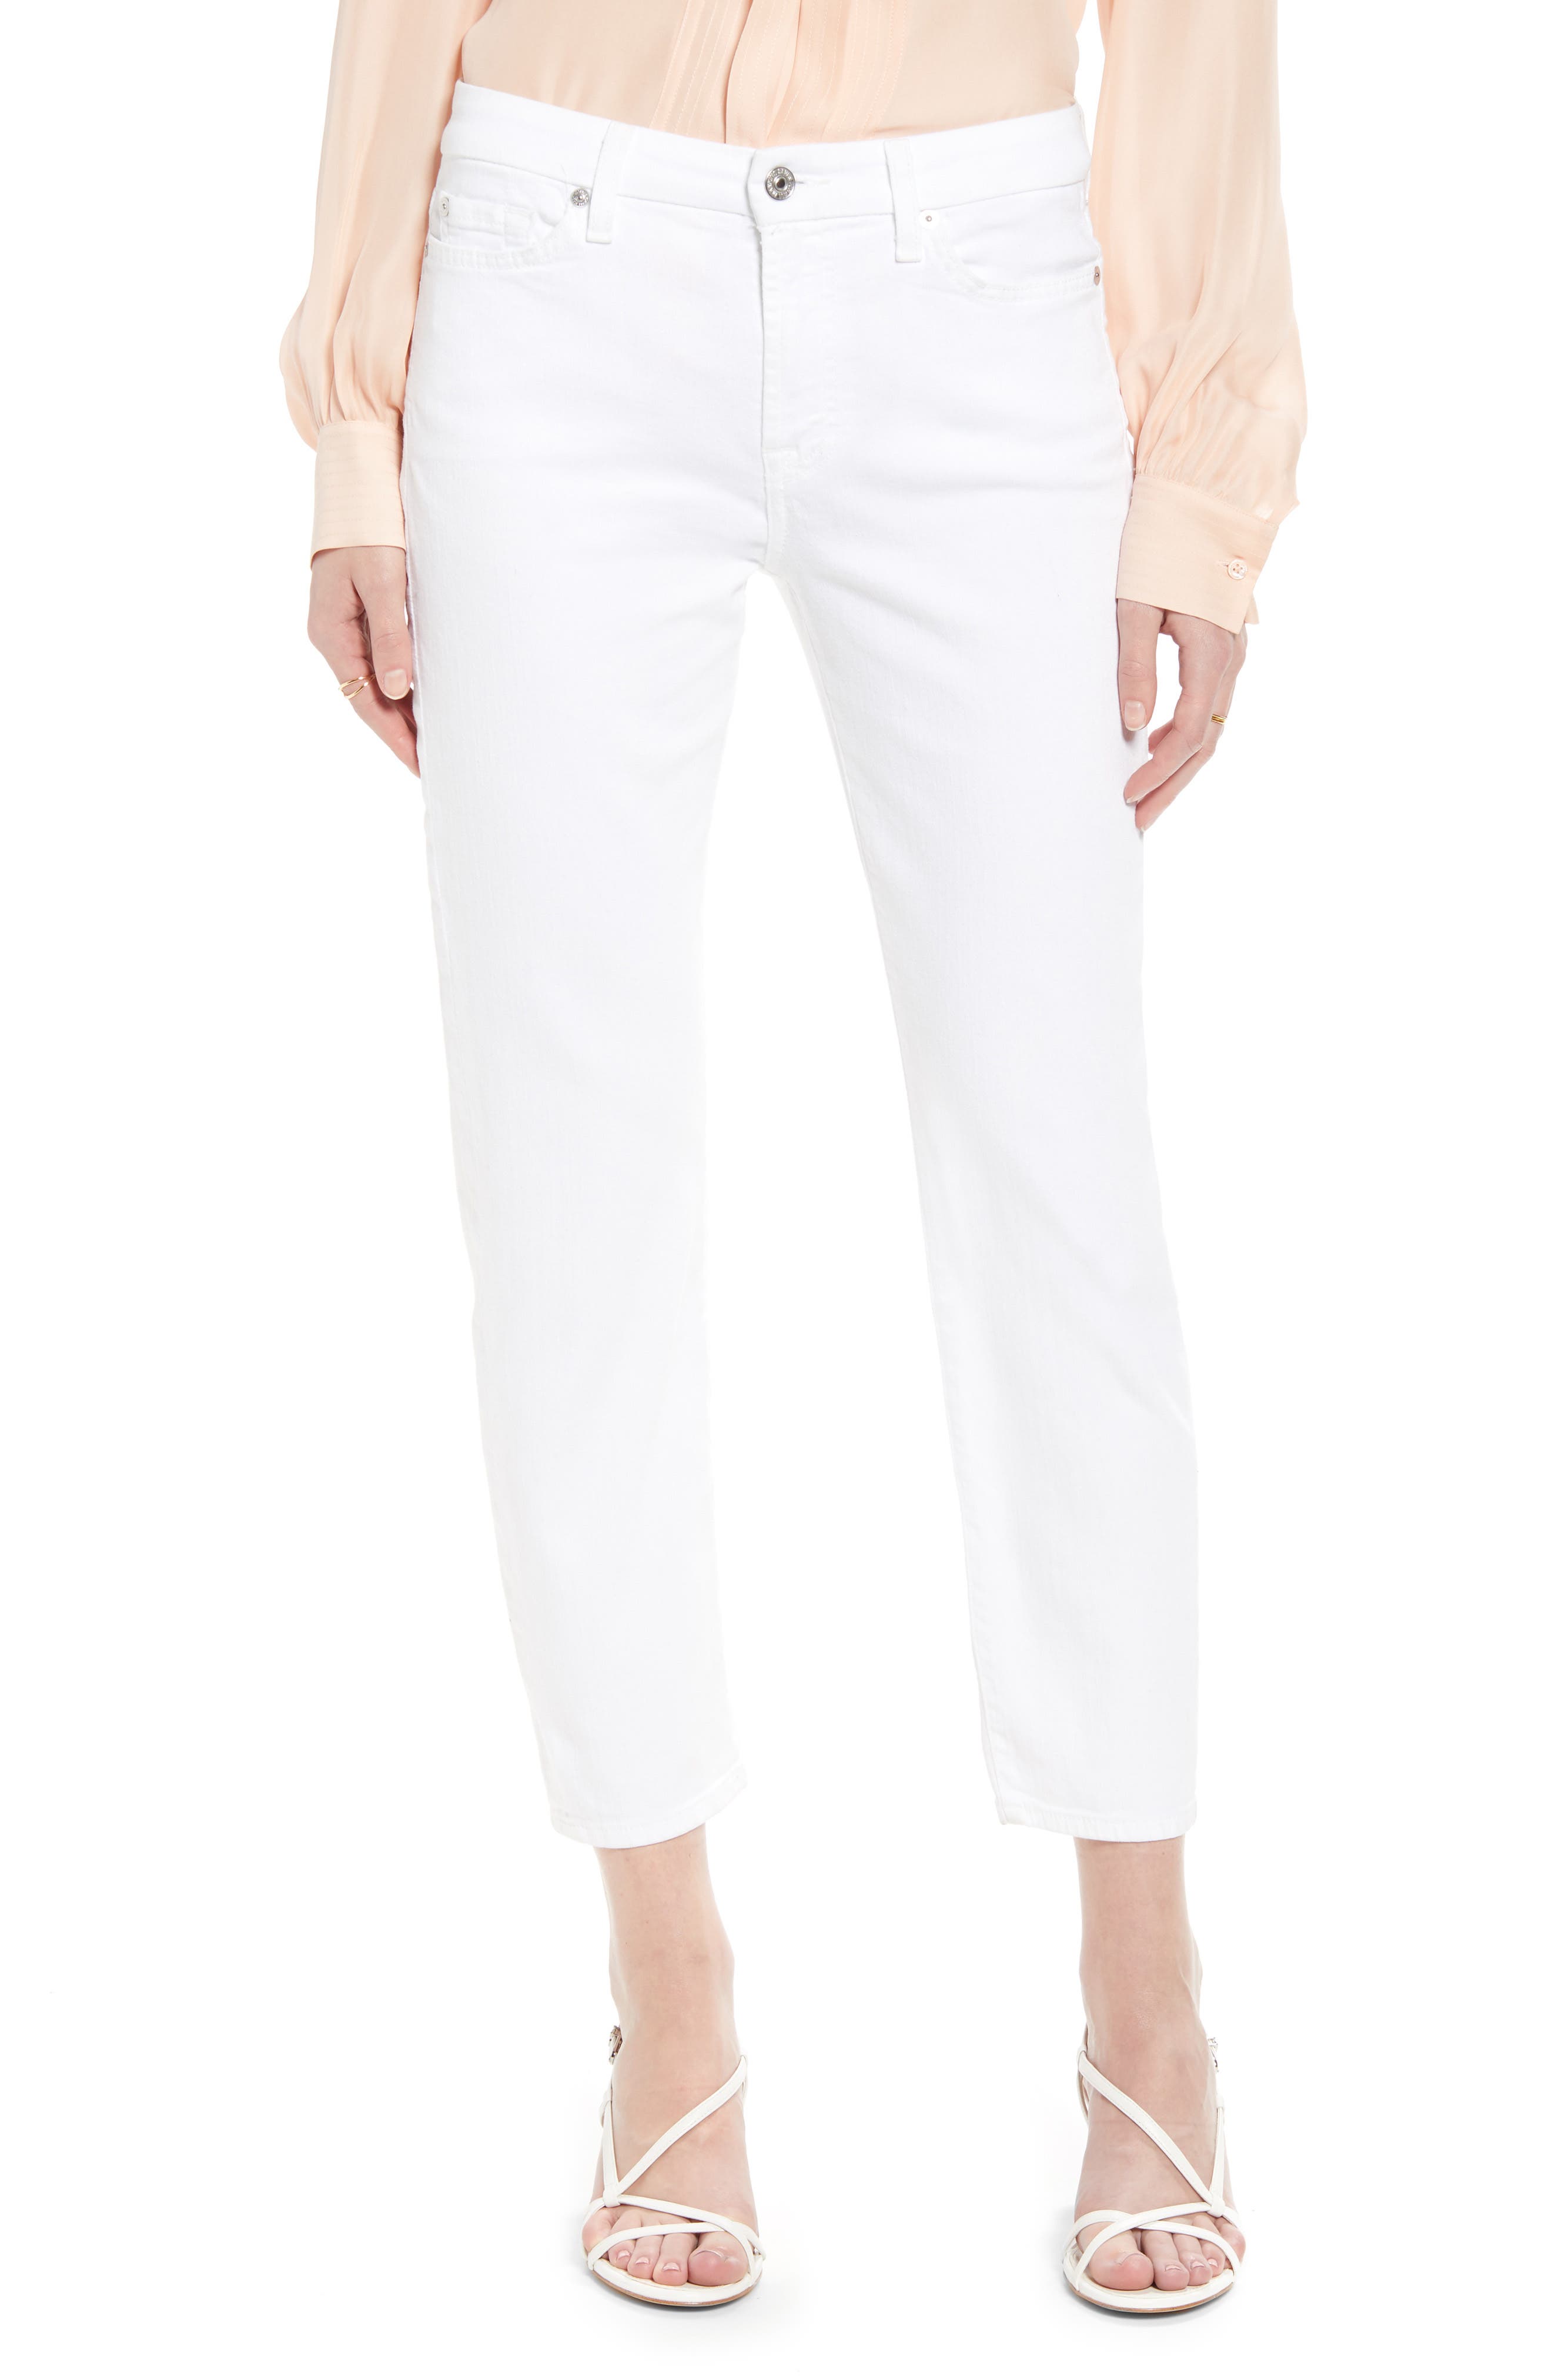 7 for all mankind white jeans